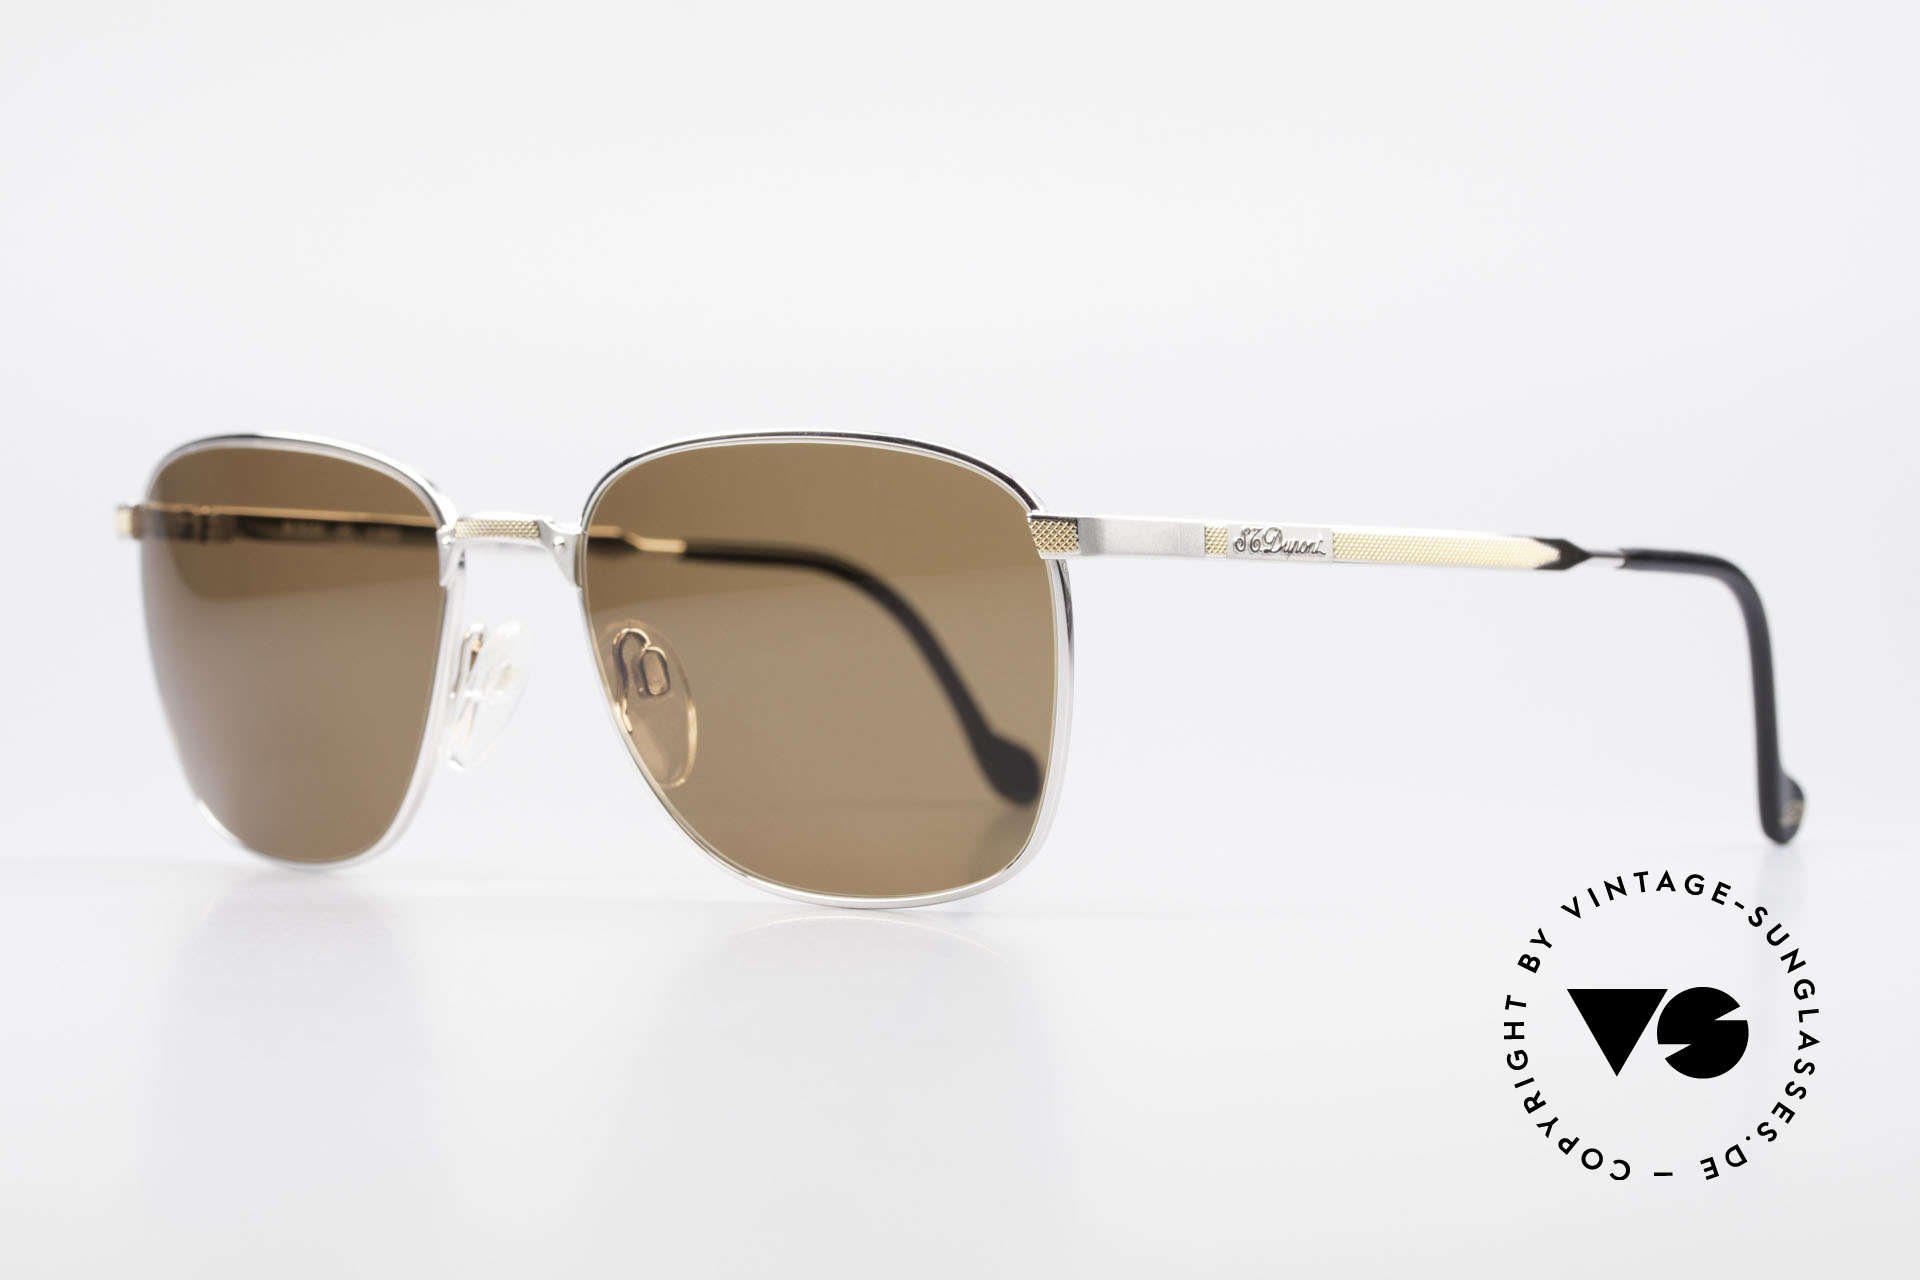 S.T. Dupont D048 Classic Luxury Shades 23kt, top craftsmanship (Dupont frames are 23kt gold-plated), Made for Men